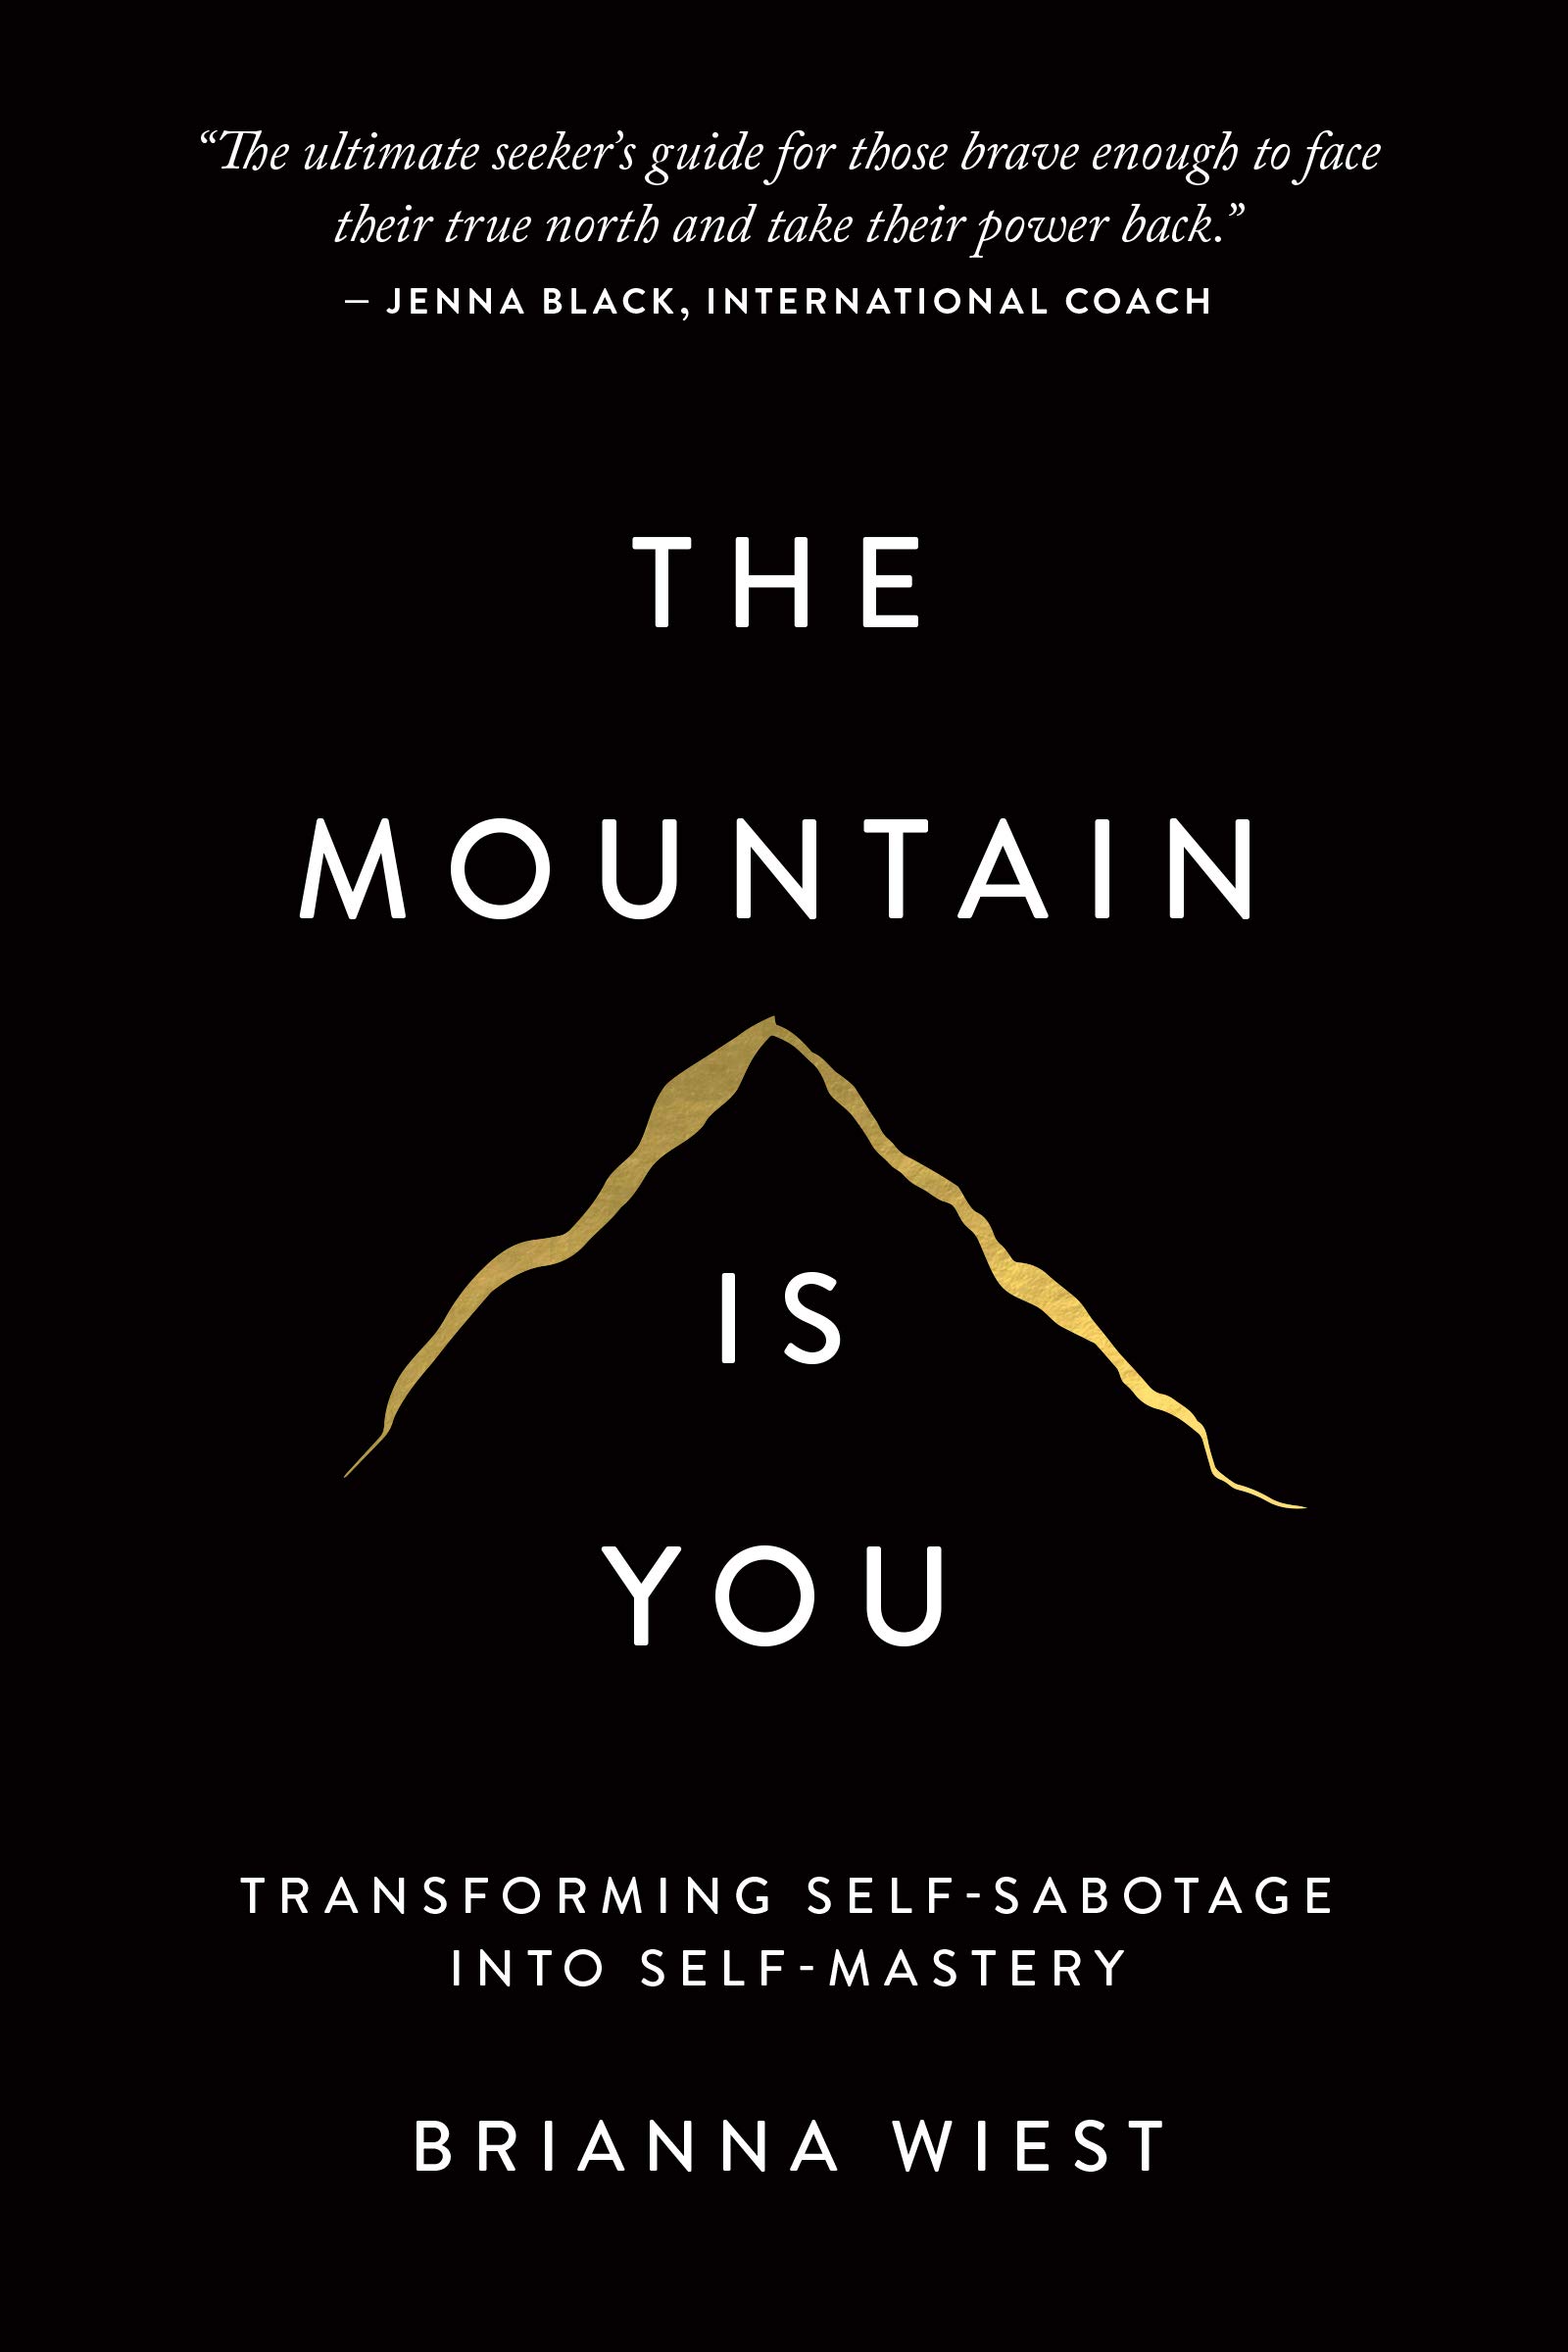 [EPUB] The Mountain Is You: Transforming Self-Sabotage Into Self-Mastery by Brianna Wiest